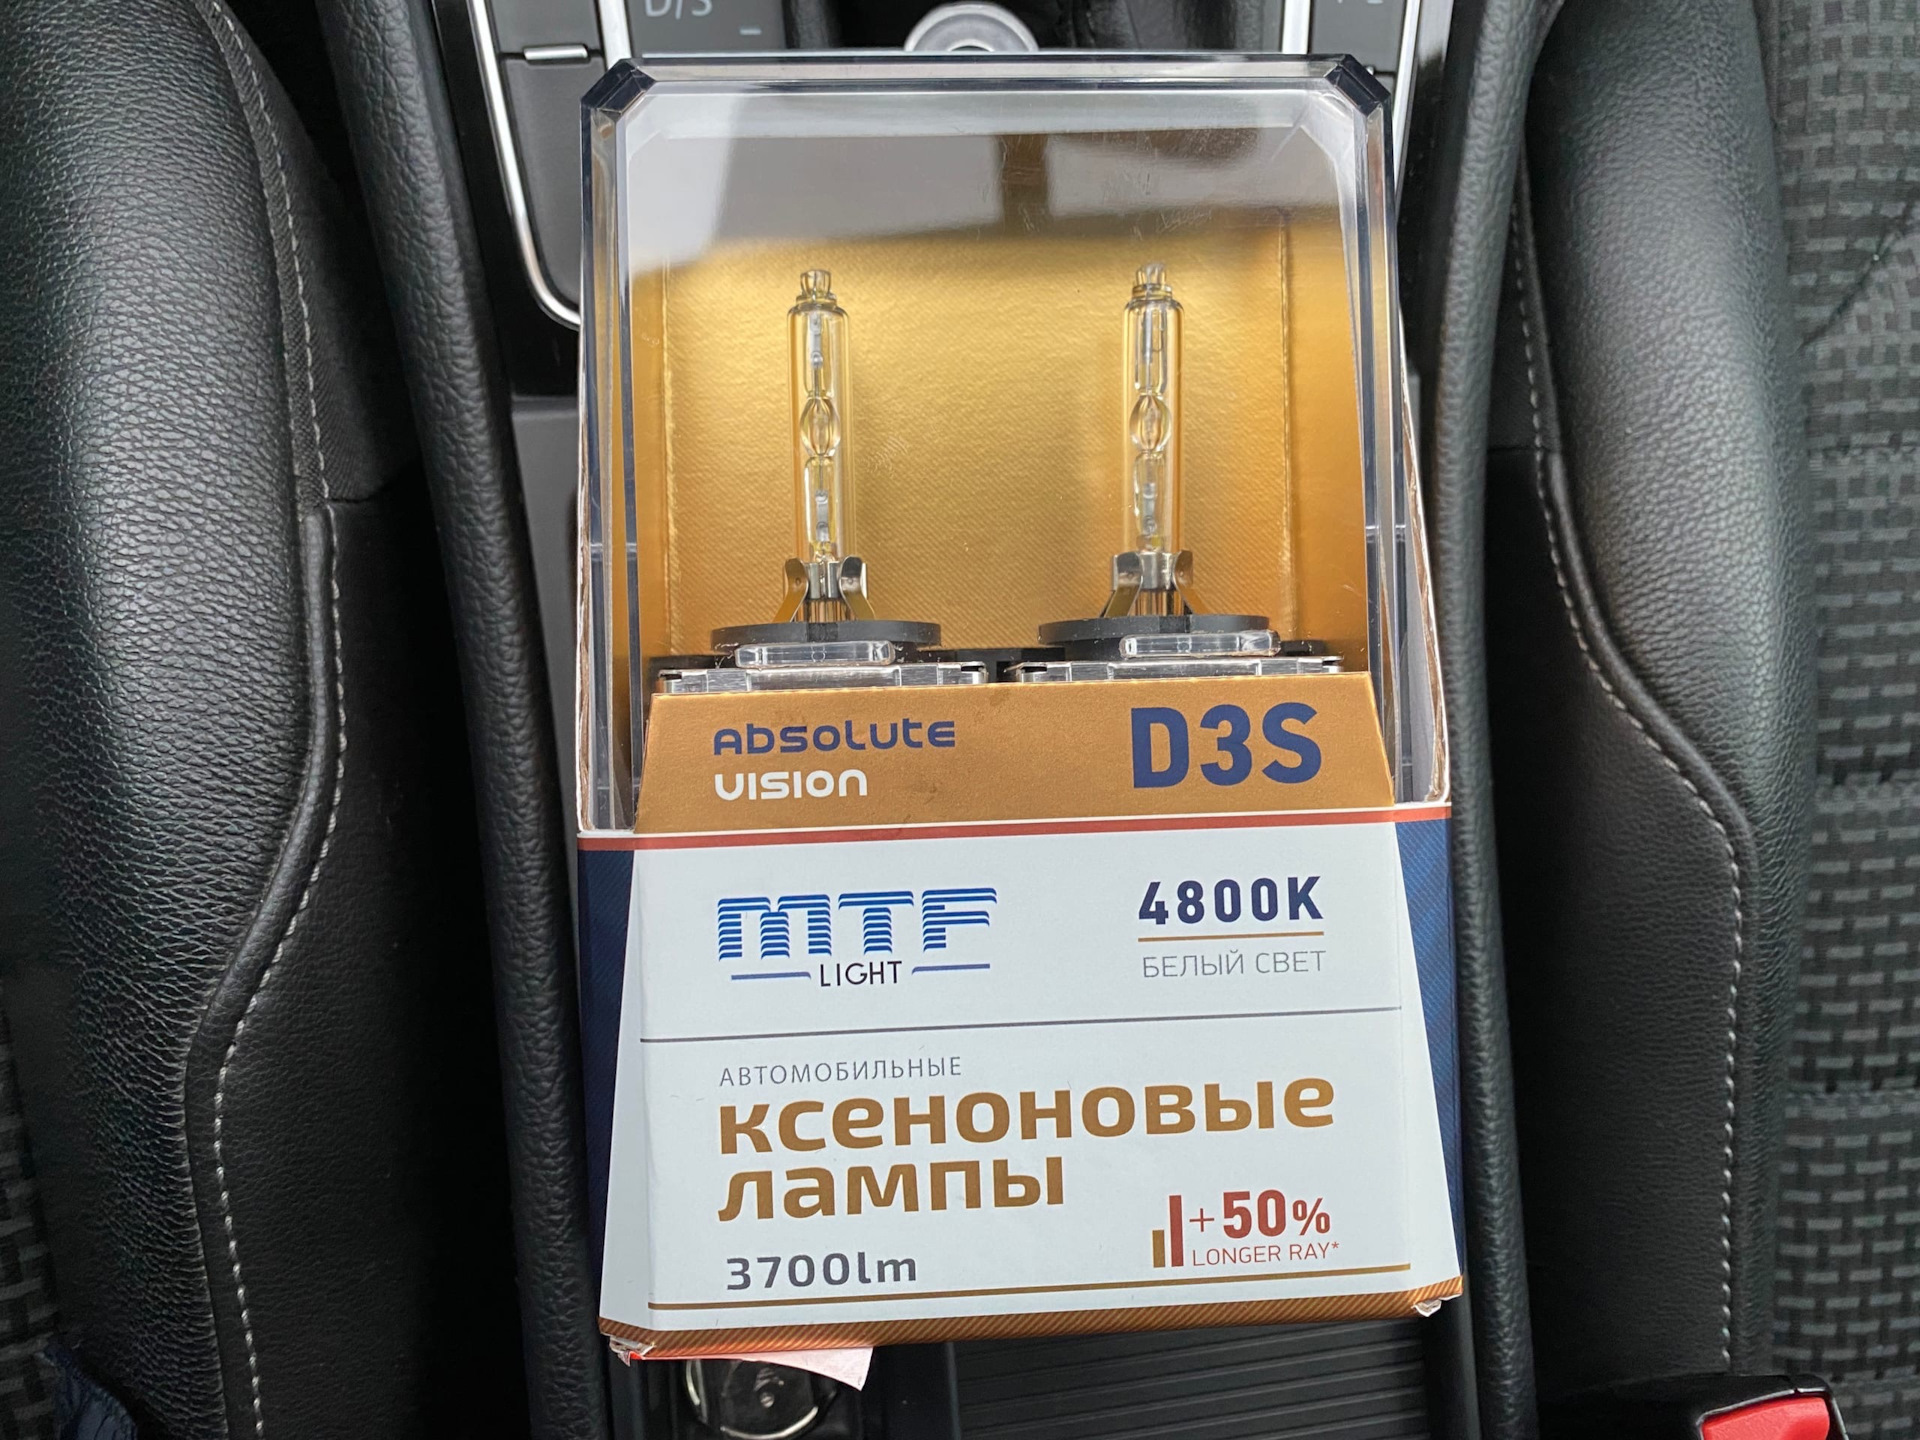 Light absolute vision. MTF absolute Vision 4800k. МТФ absolutevision. D5s MTF led. Лед лампы d3s MTF.